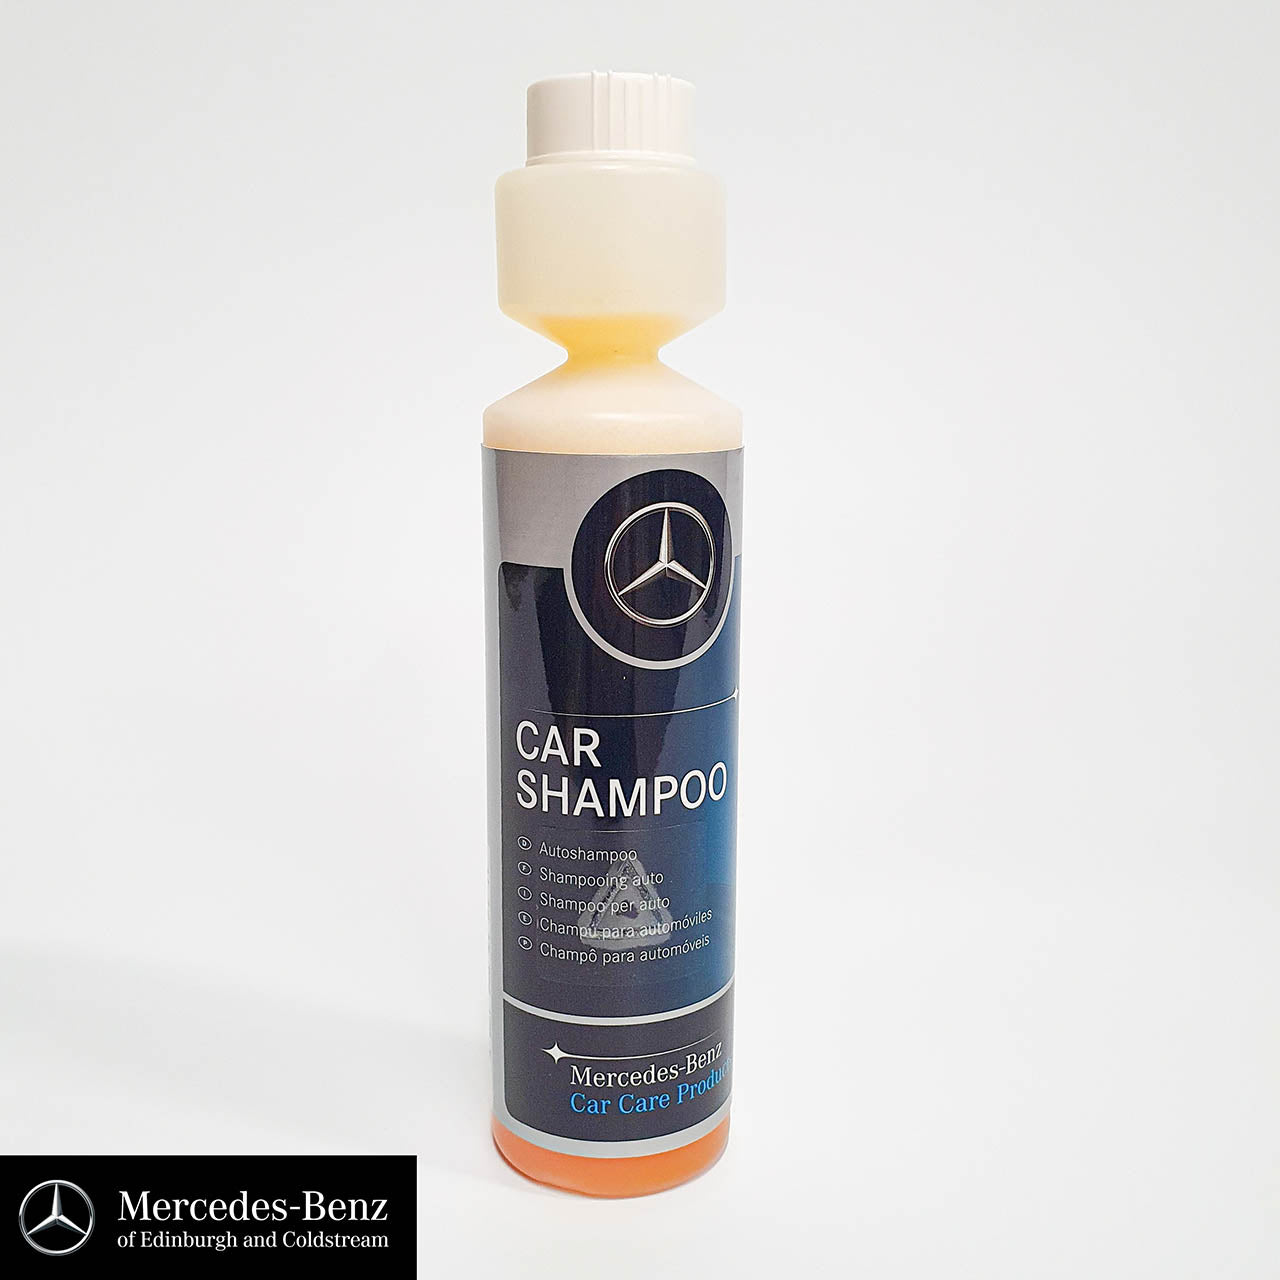 Car shampoo - concentrated